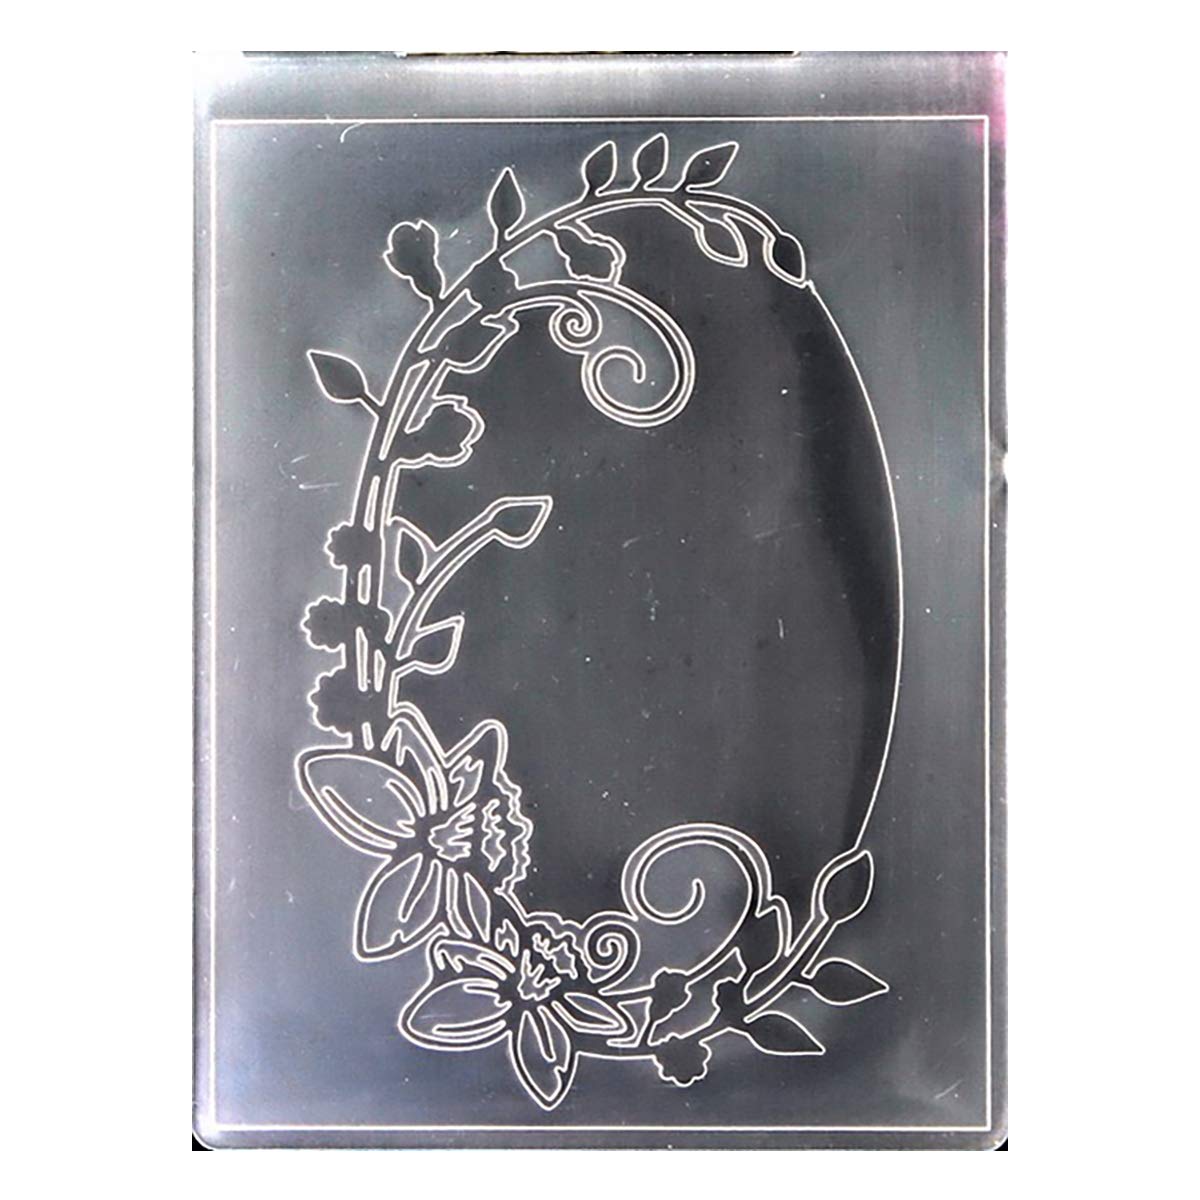 Kwan Crafts Flowers Frame Plastic Embossing Folders for Card Making  Scrapbooking and Other Paper Crafts,12x15.2cm